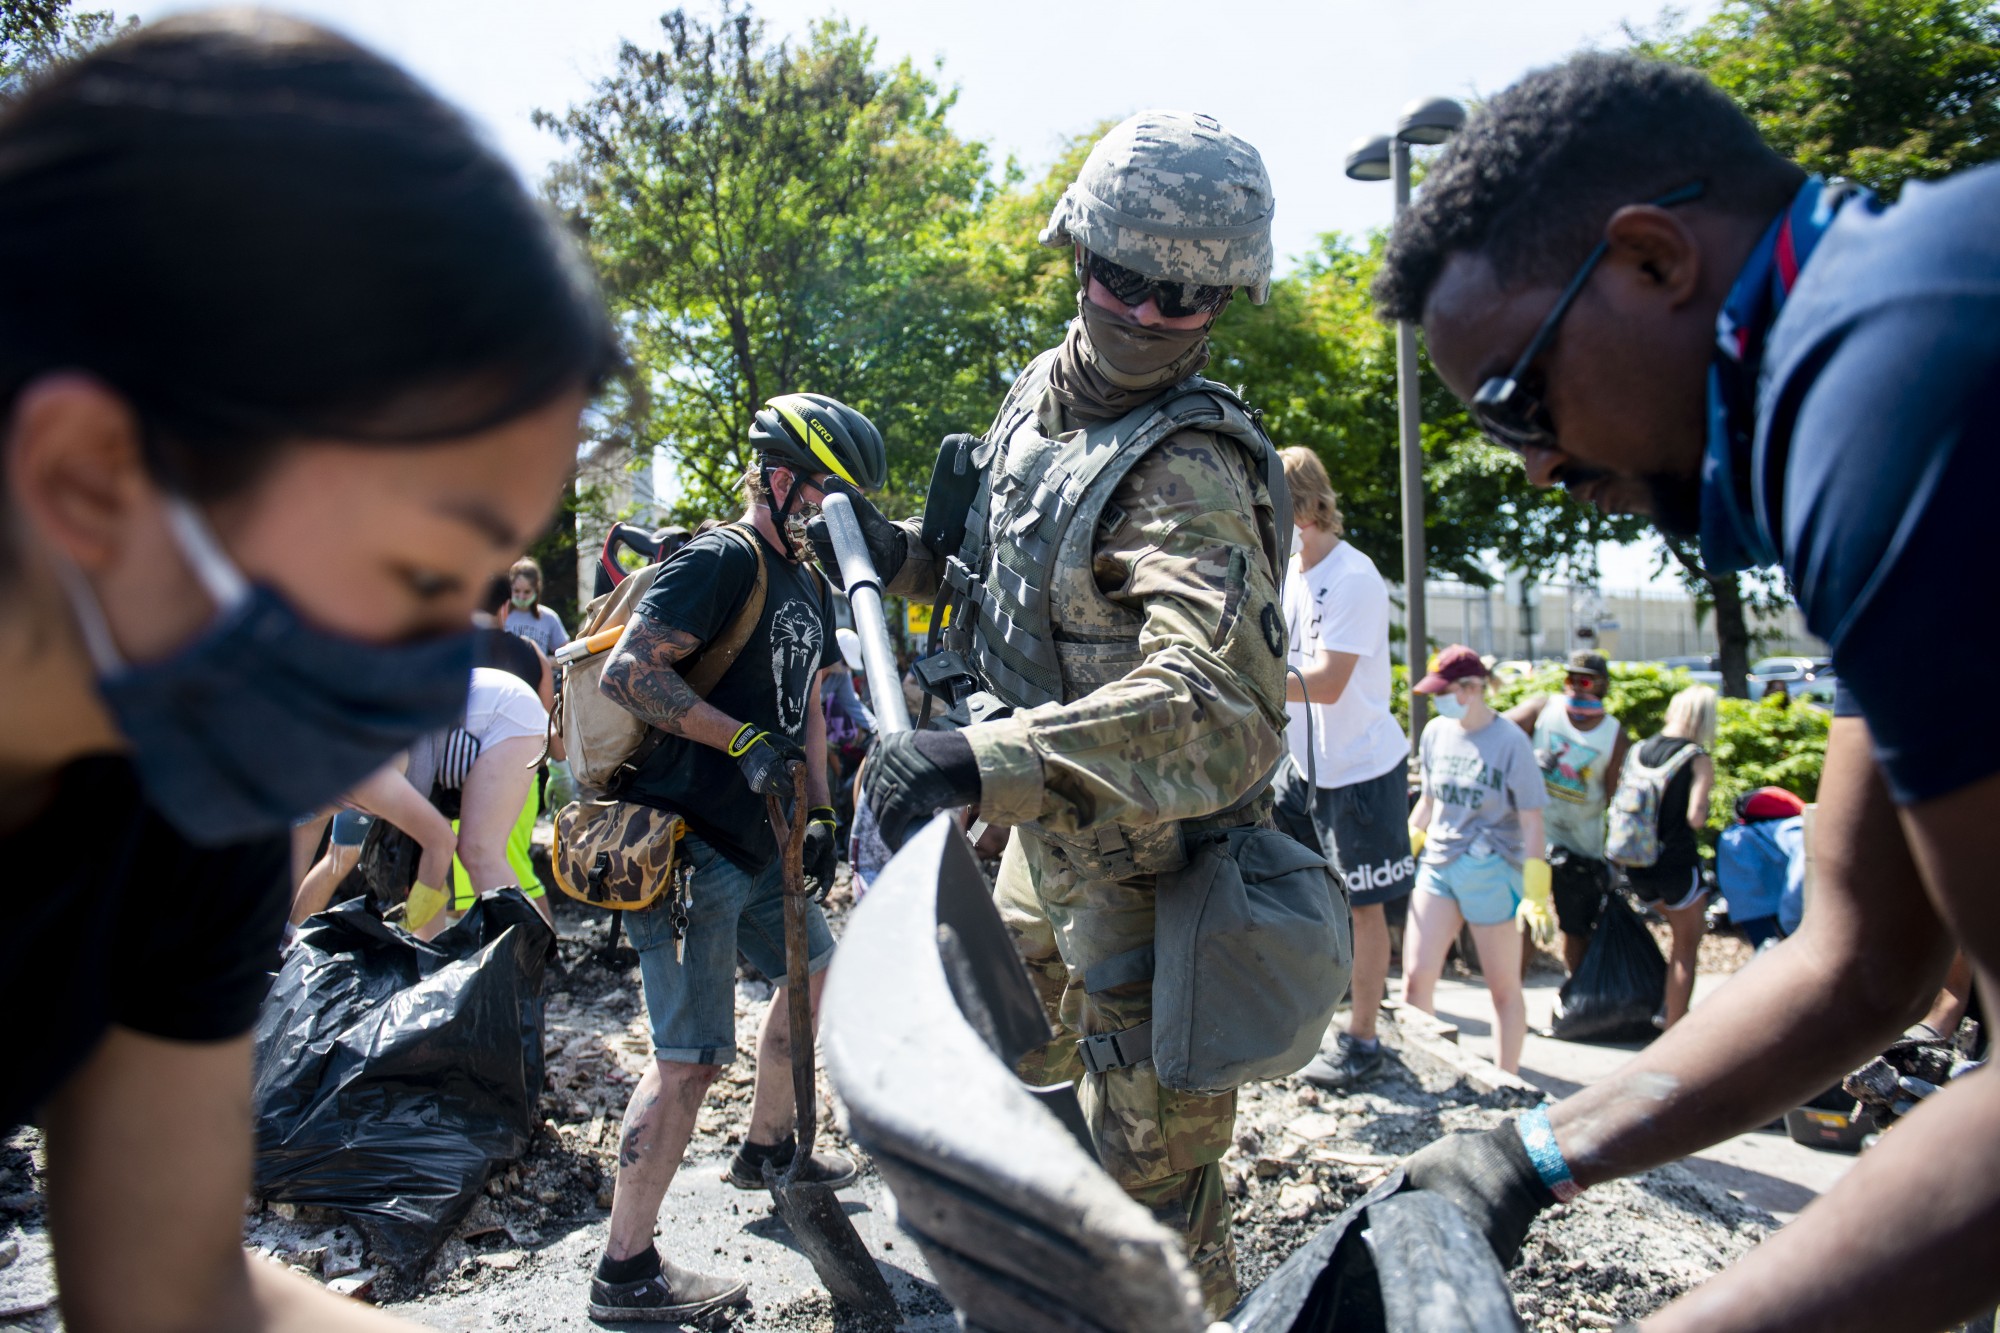 A National Guard soldier helps to clean up debris at an Arbys that was destroyed as part of riots on Lake Street in Minneapolis on Sunday, May 31.